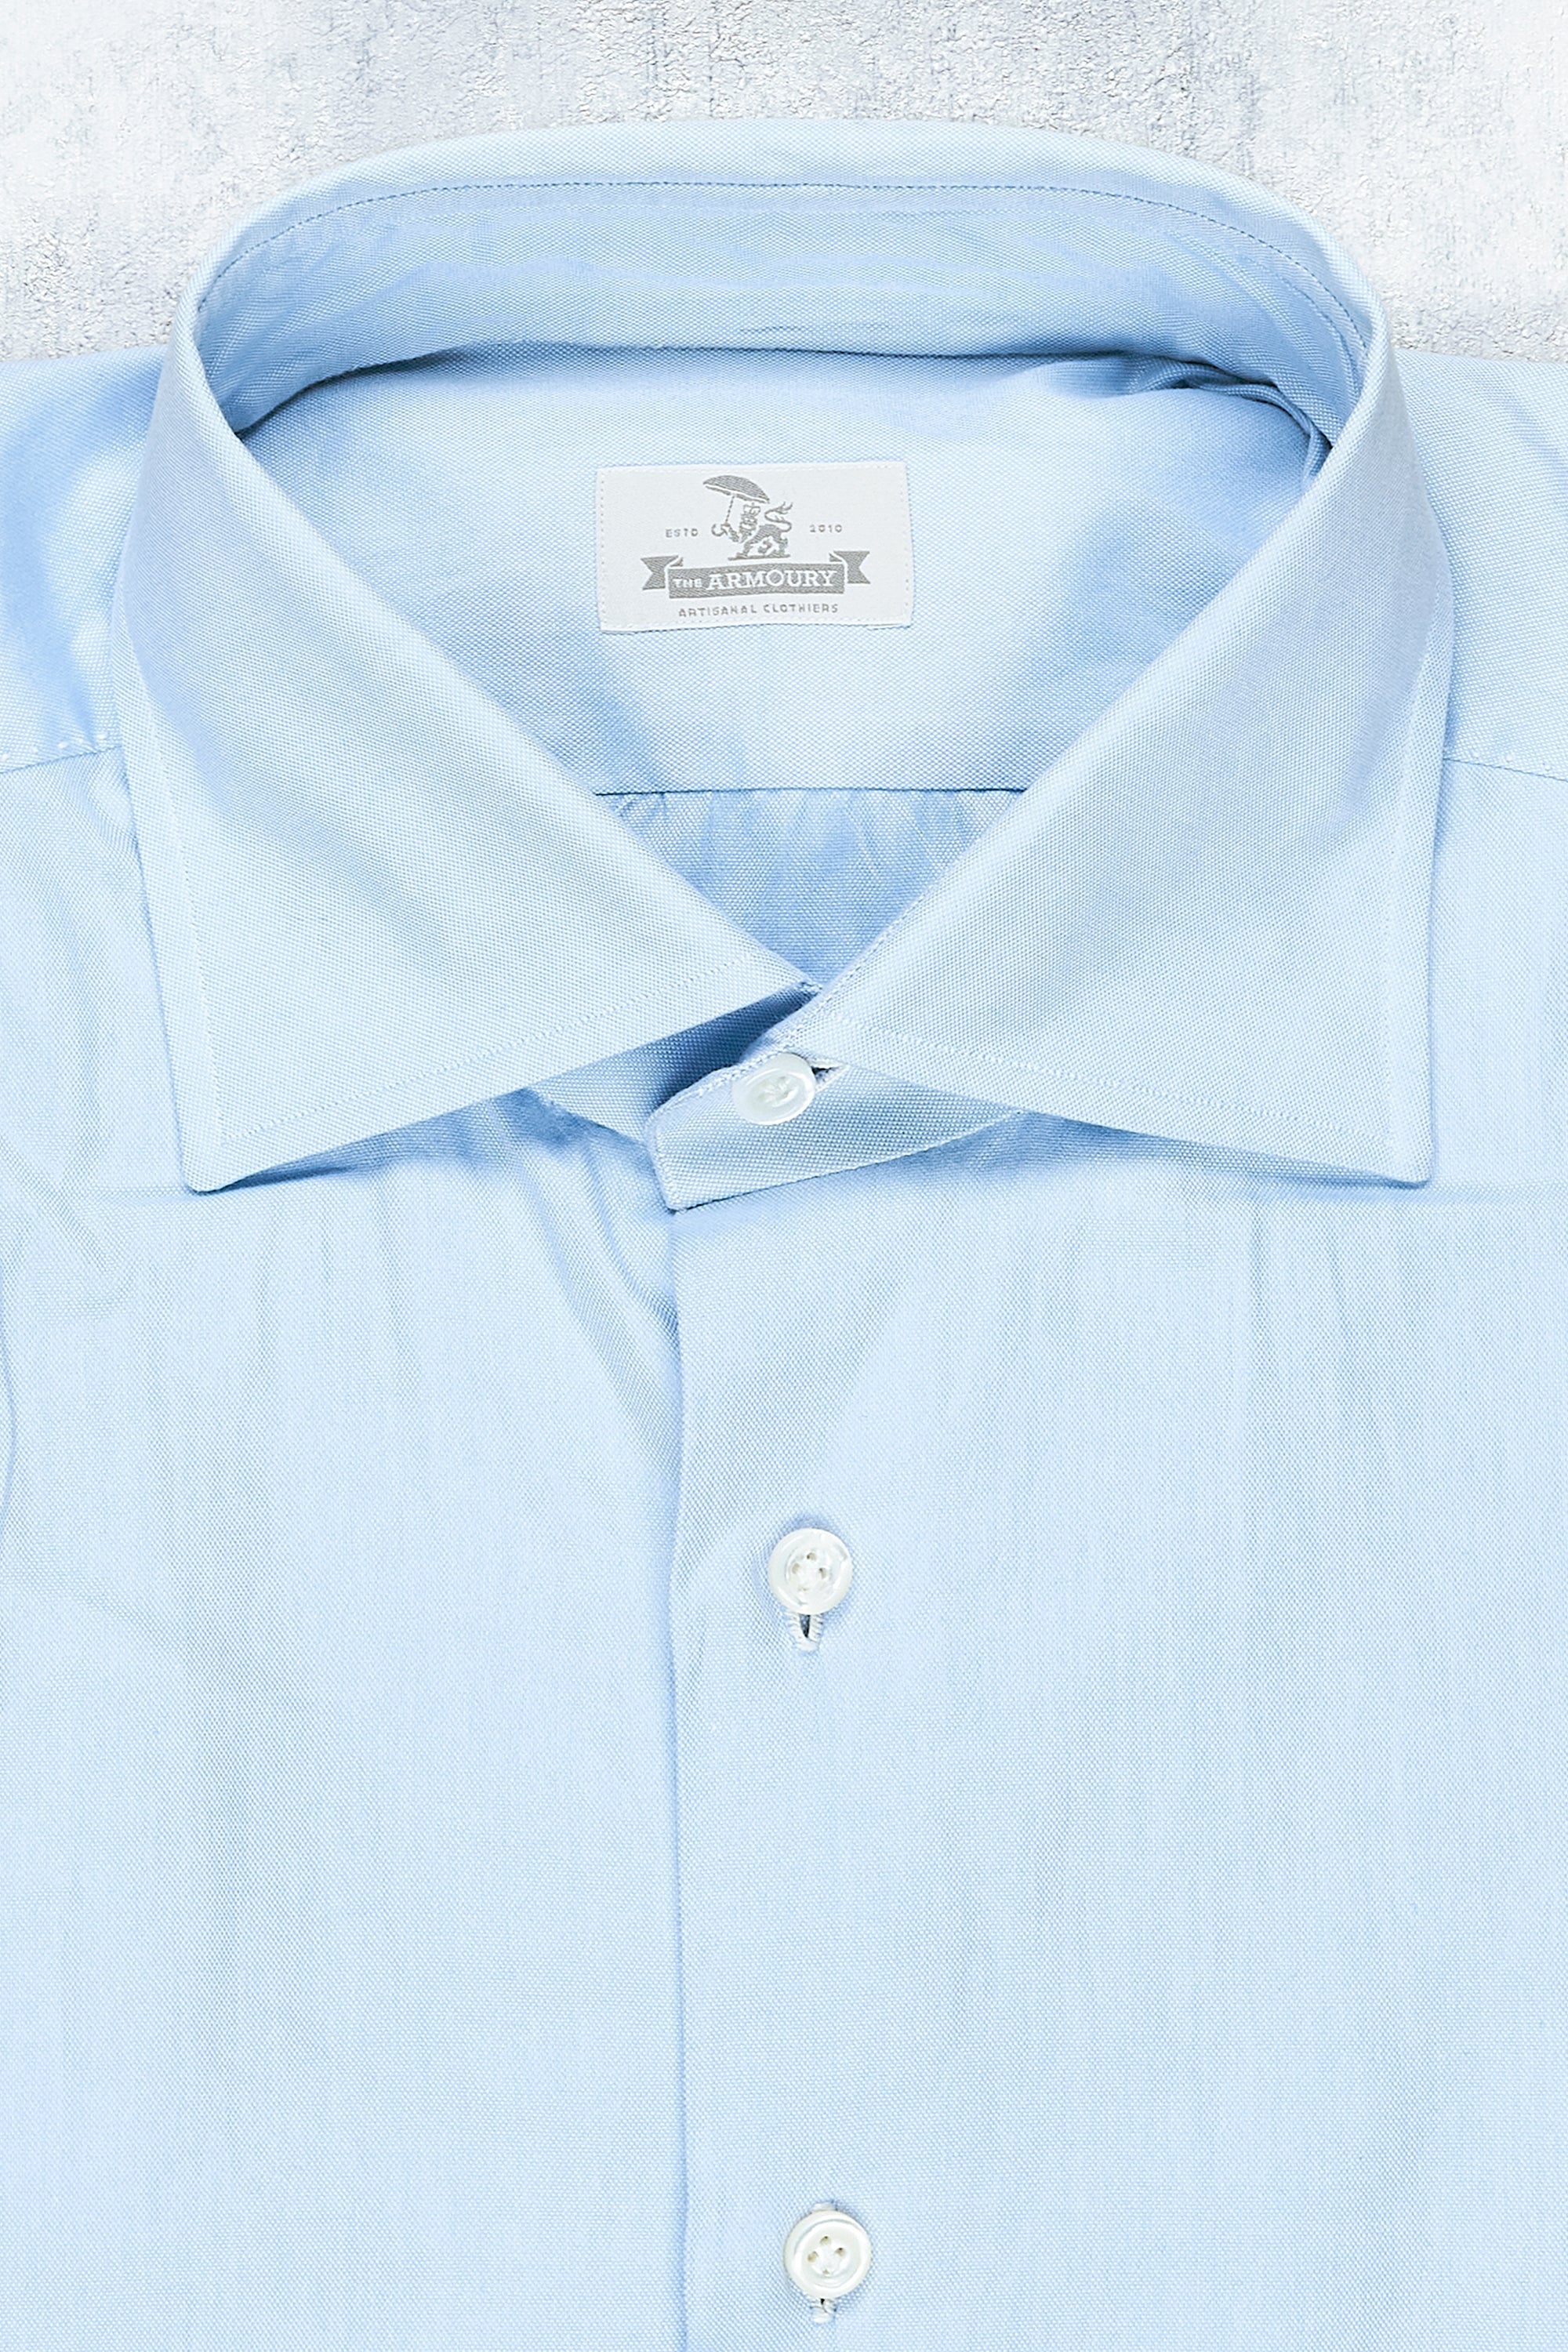 The Armoury Blue Cotton Oxford Shirt